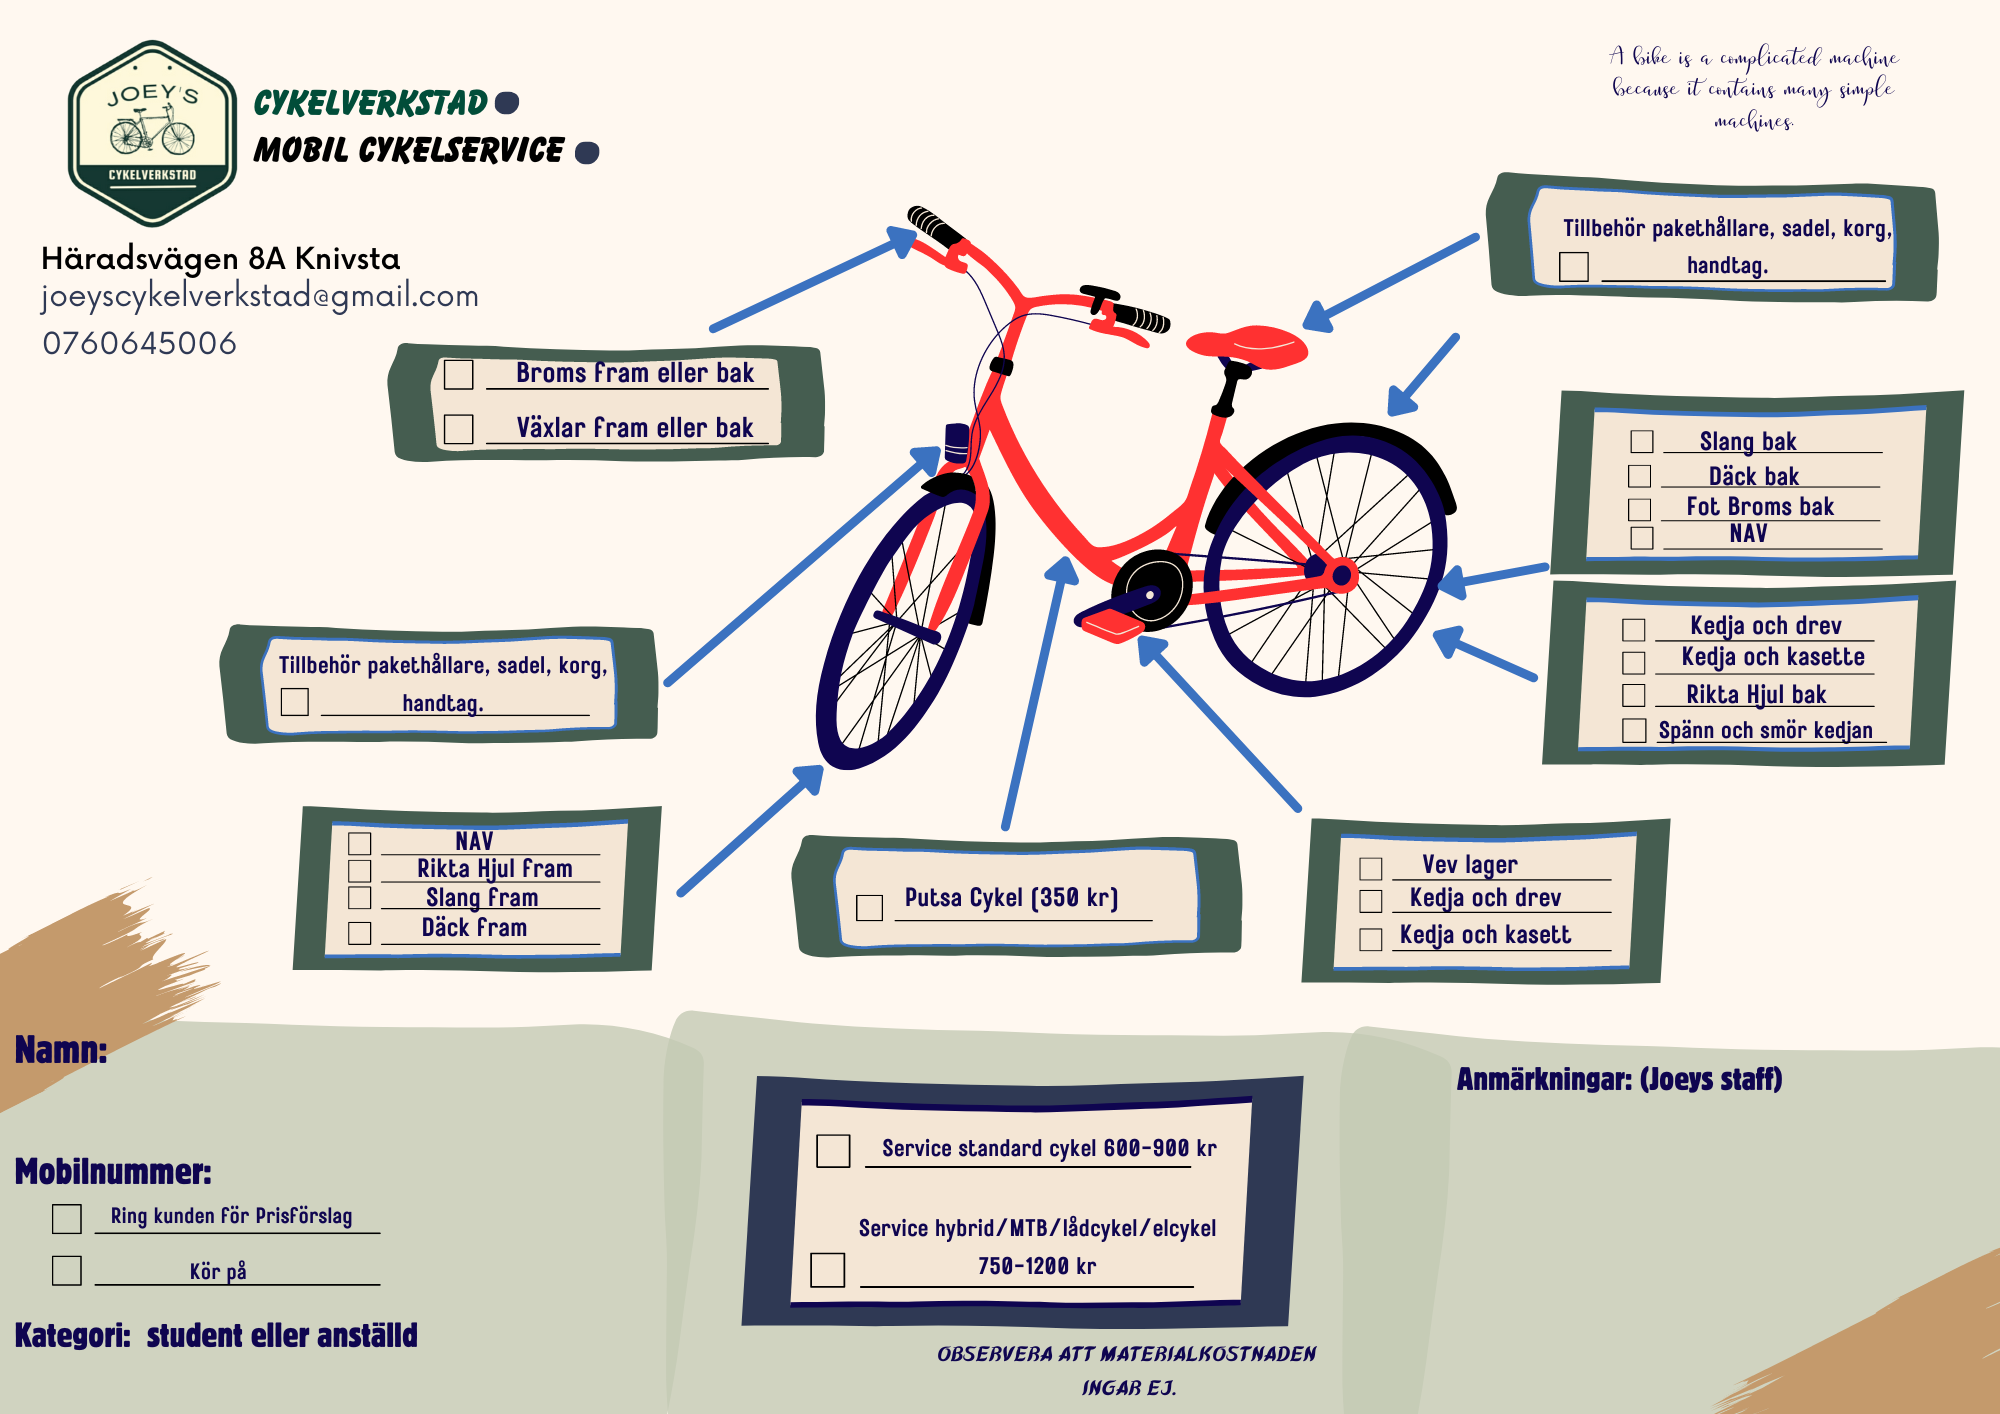 An image of a bicycle showing the different types of services that the bike service can include. The information of the supplier is also included